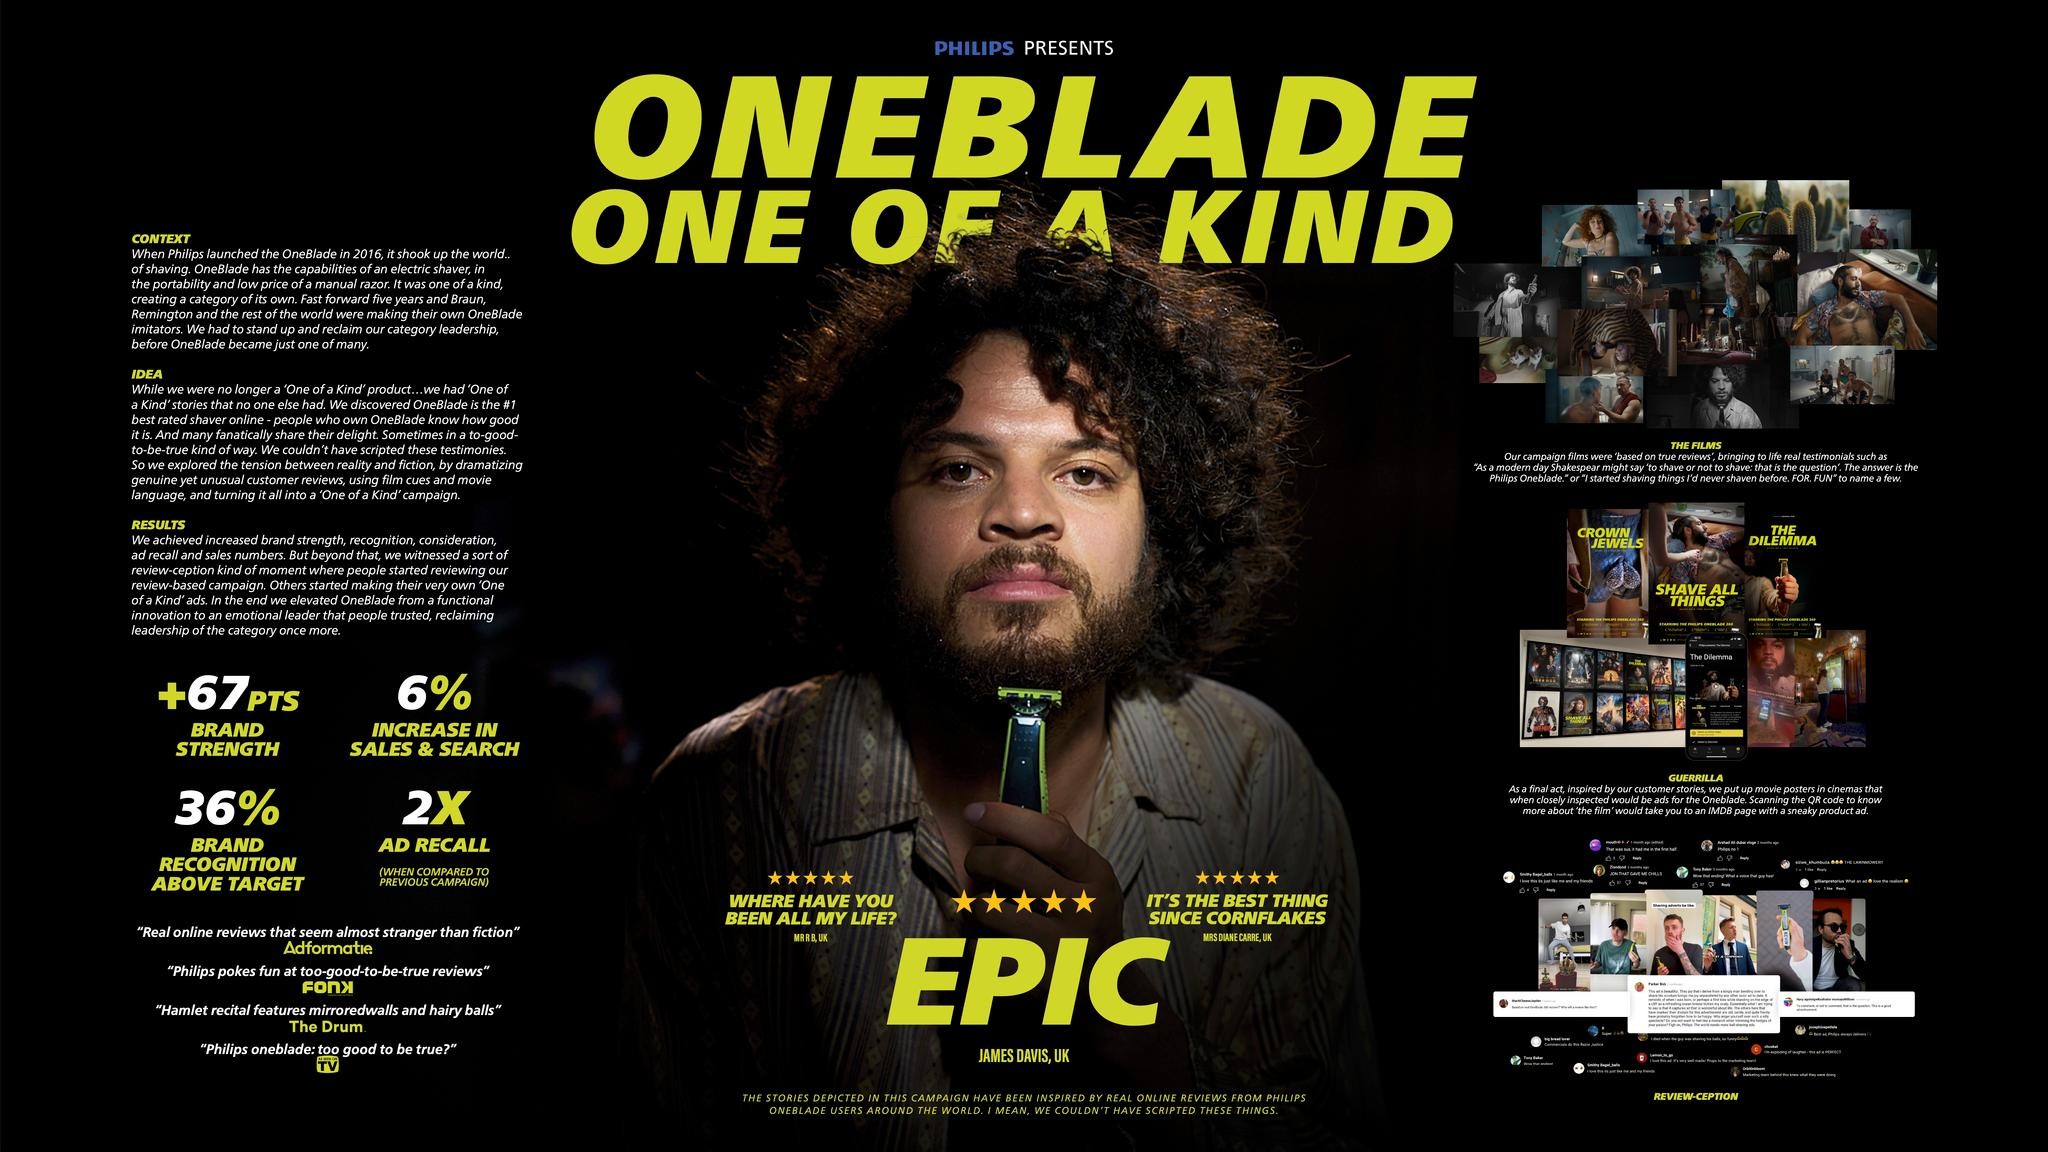 OneBlade, One of a Kind